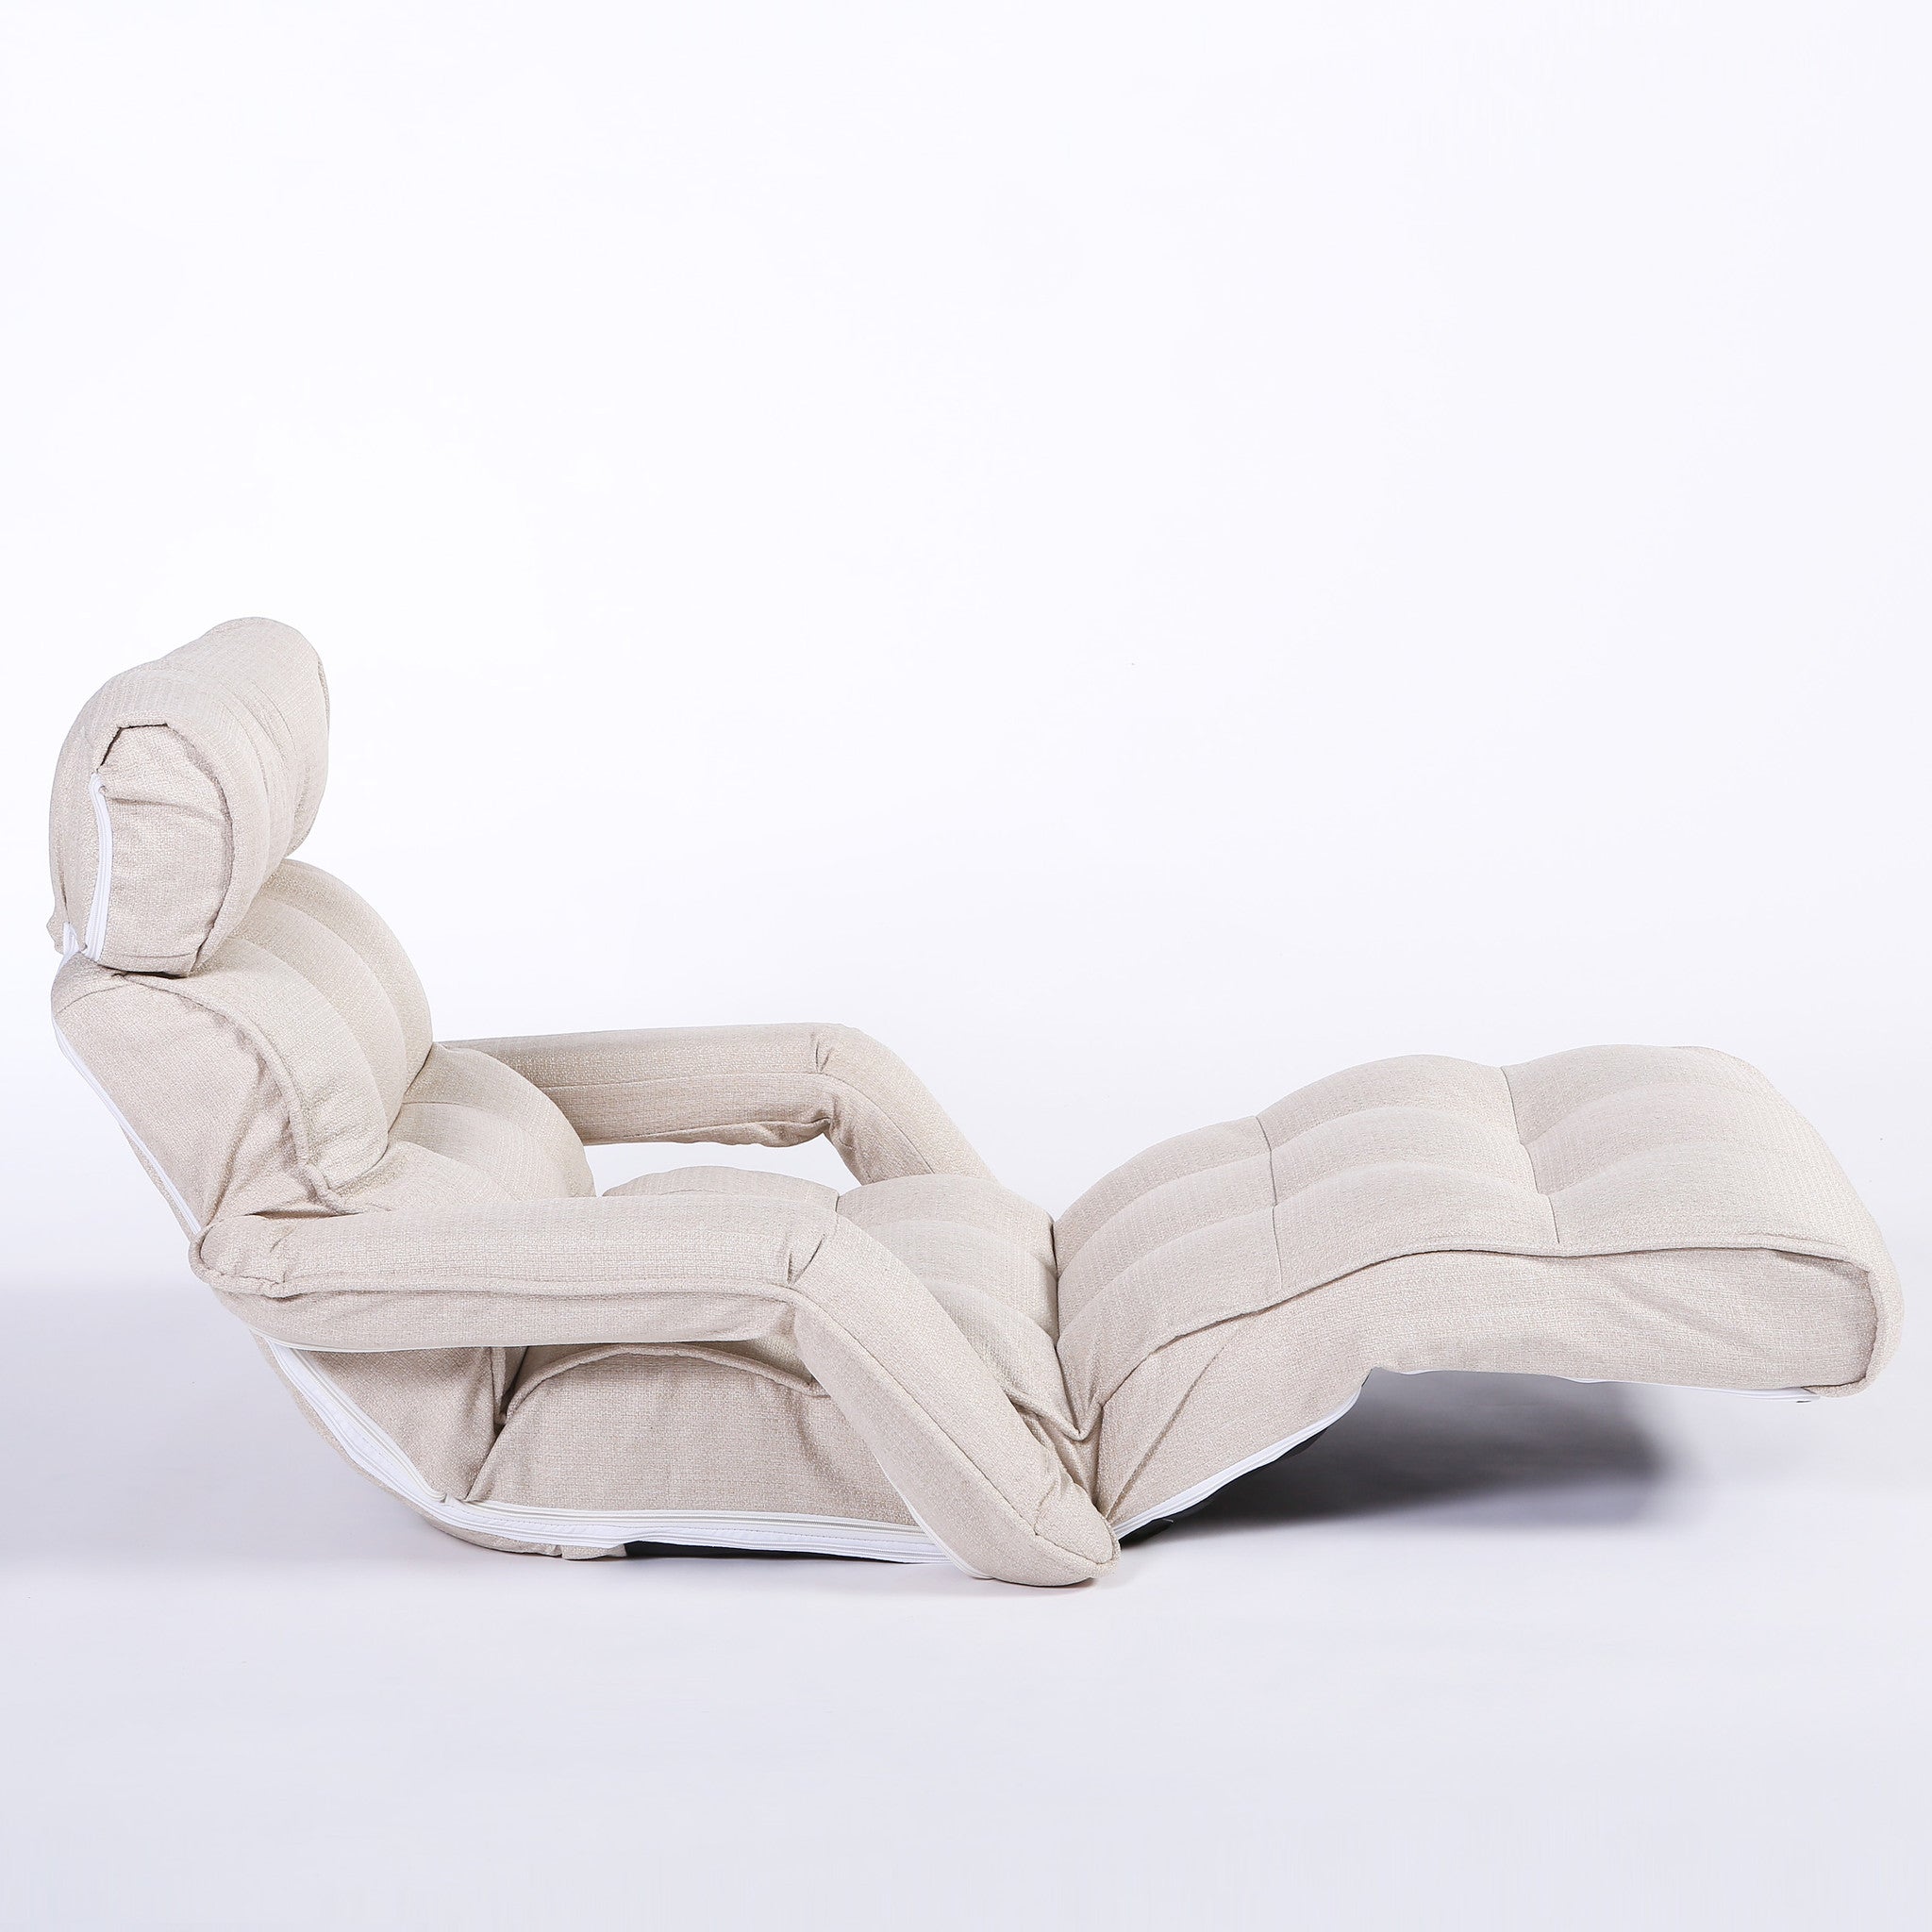 Pro White Floor Sofa Chair Recliner with Armrest for Floor Seating